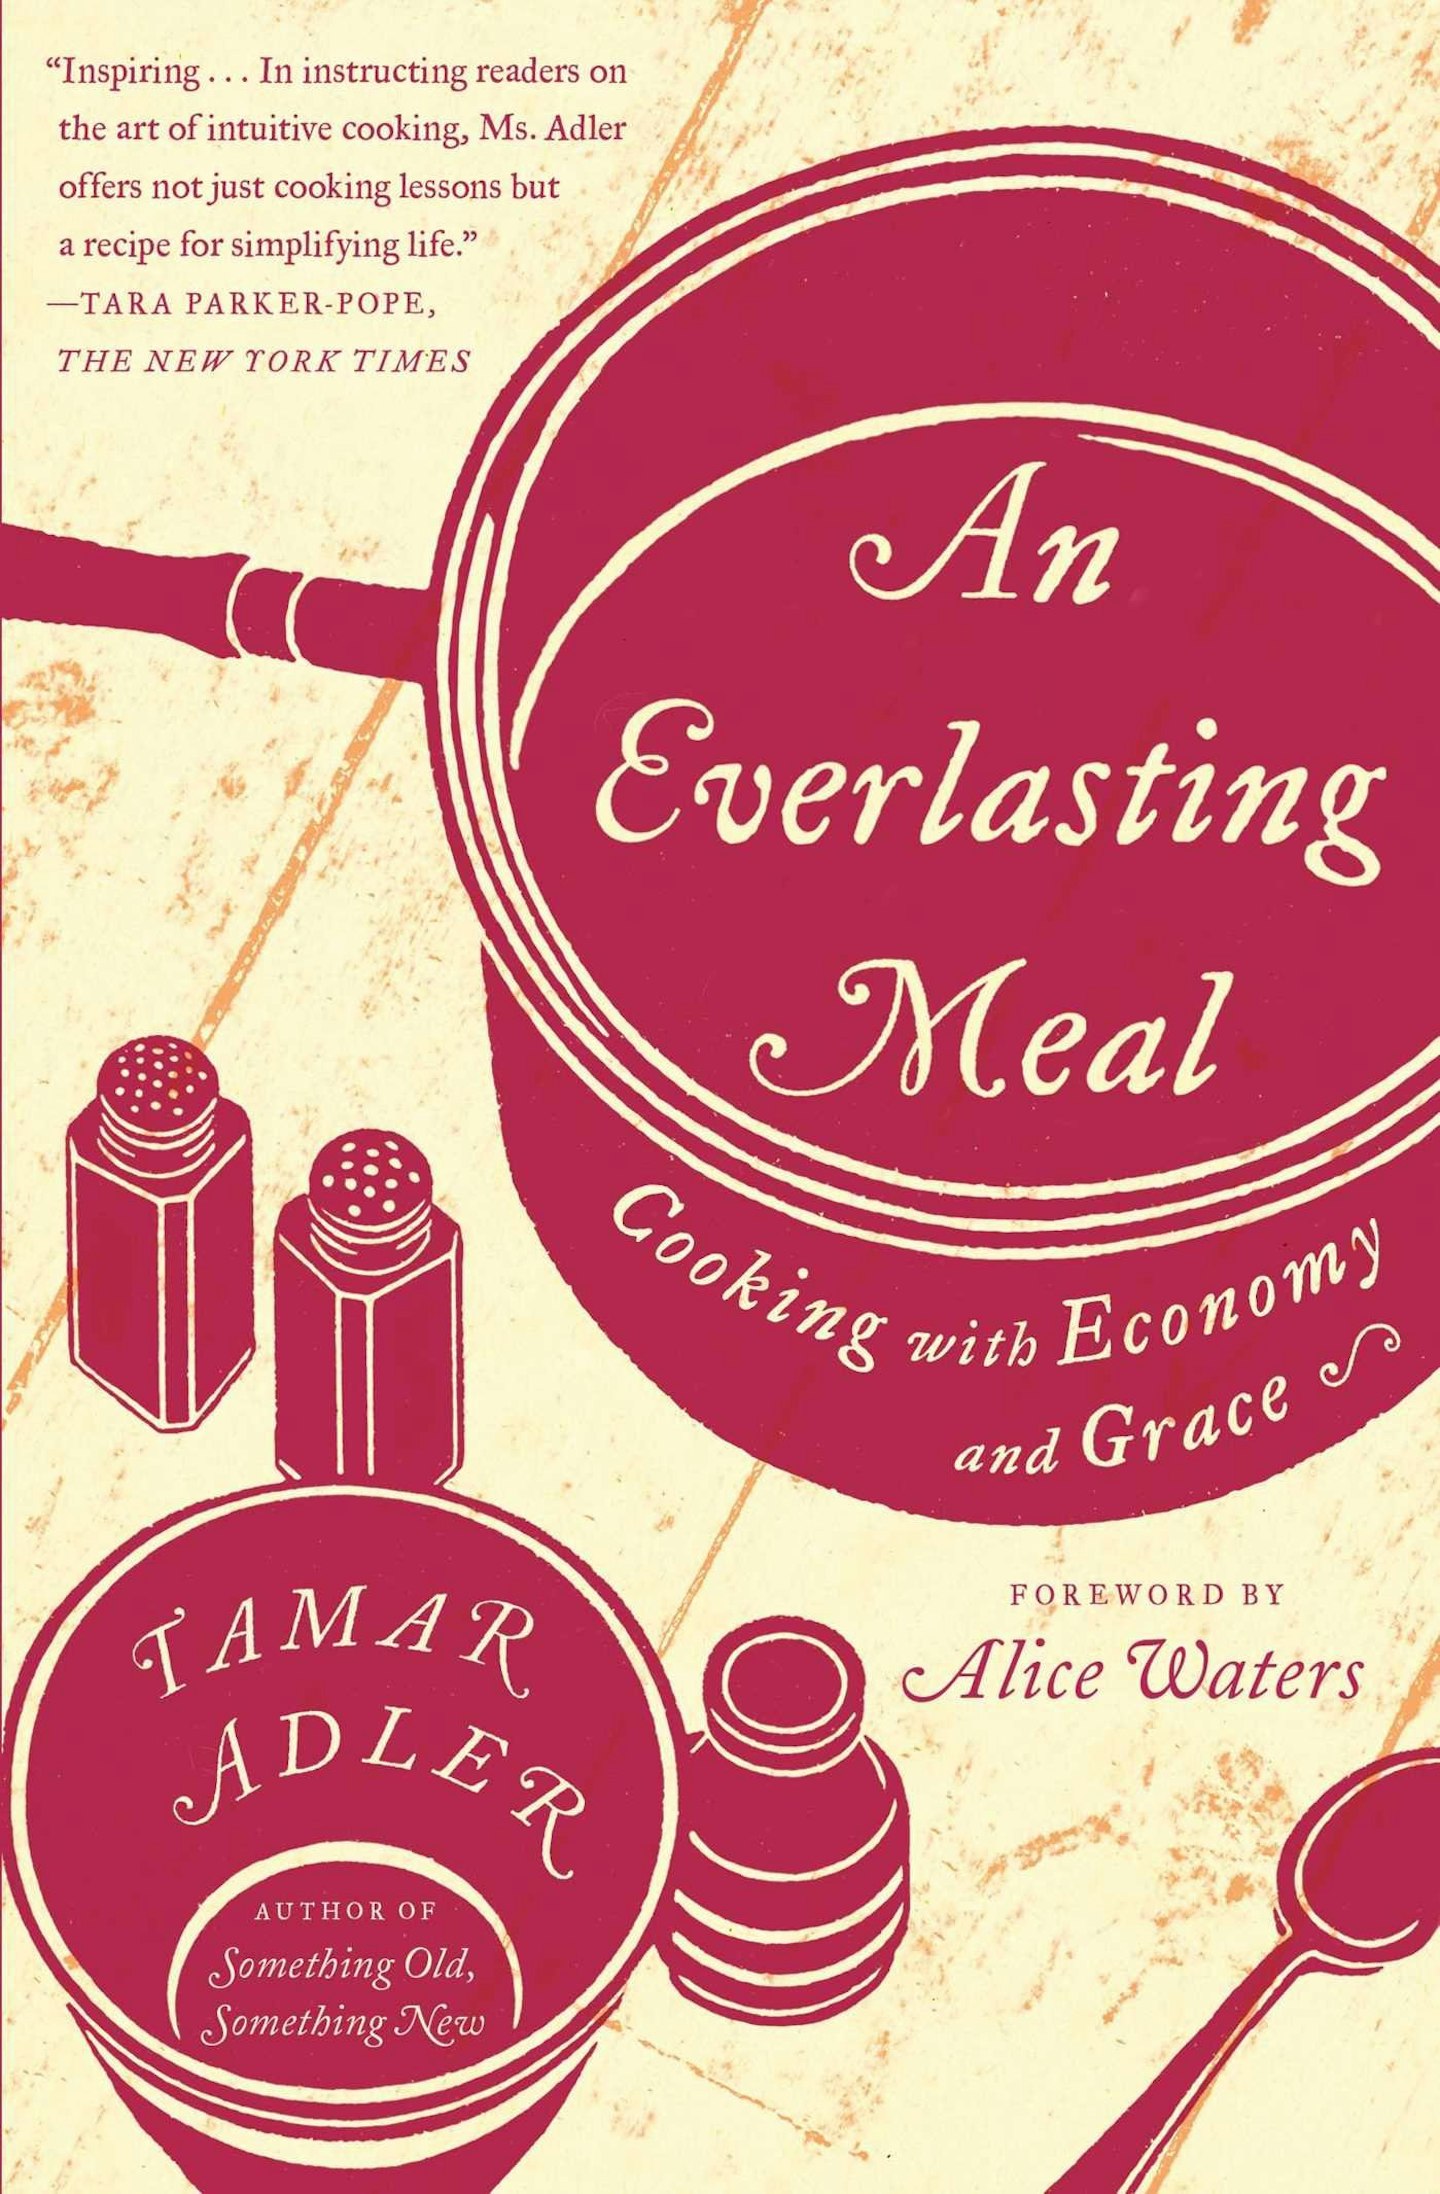 The Everlasting Meal: Cooking With Economy and Grace by Tamar Adler